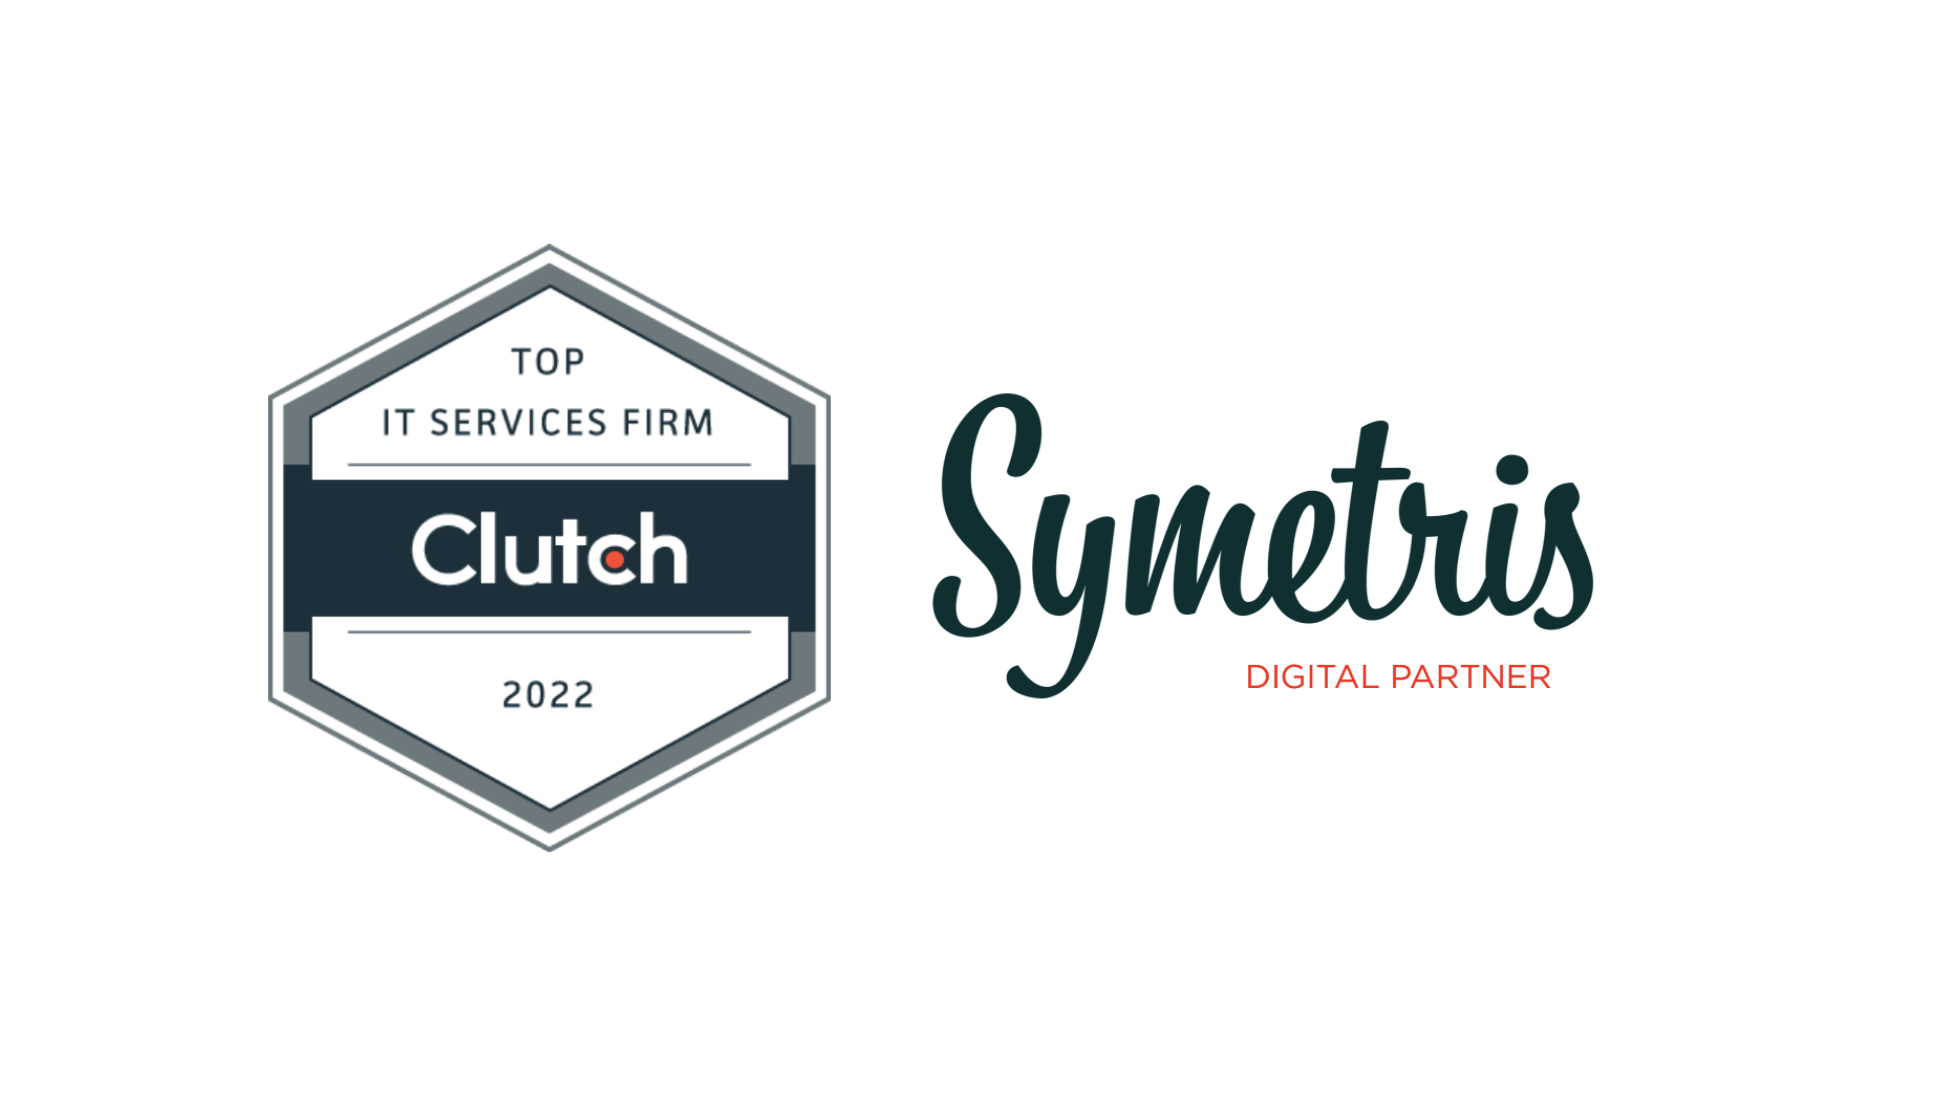 Clutch Top IP Services Firm 2022